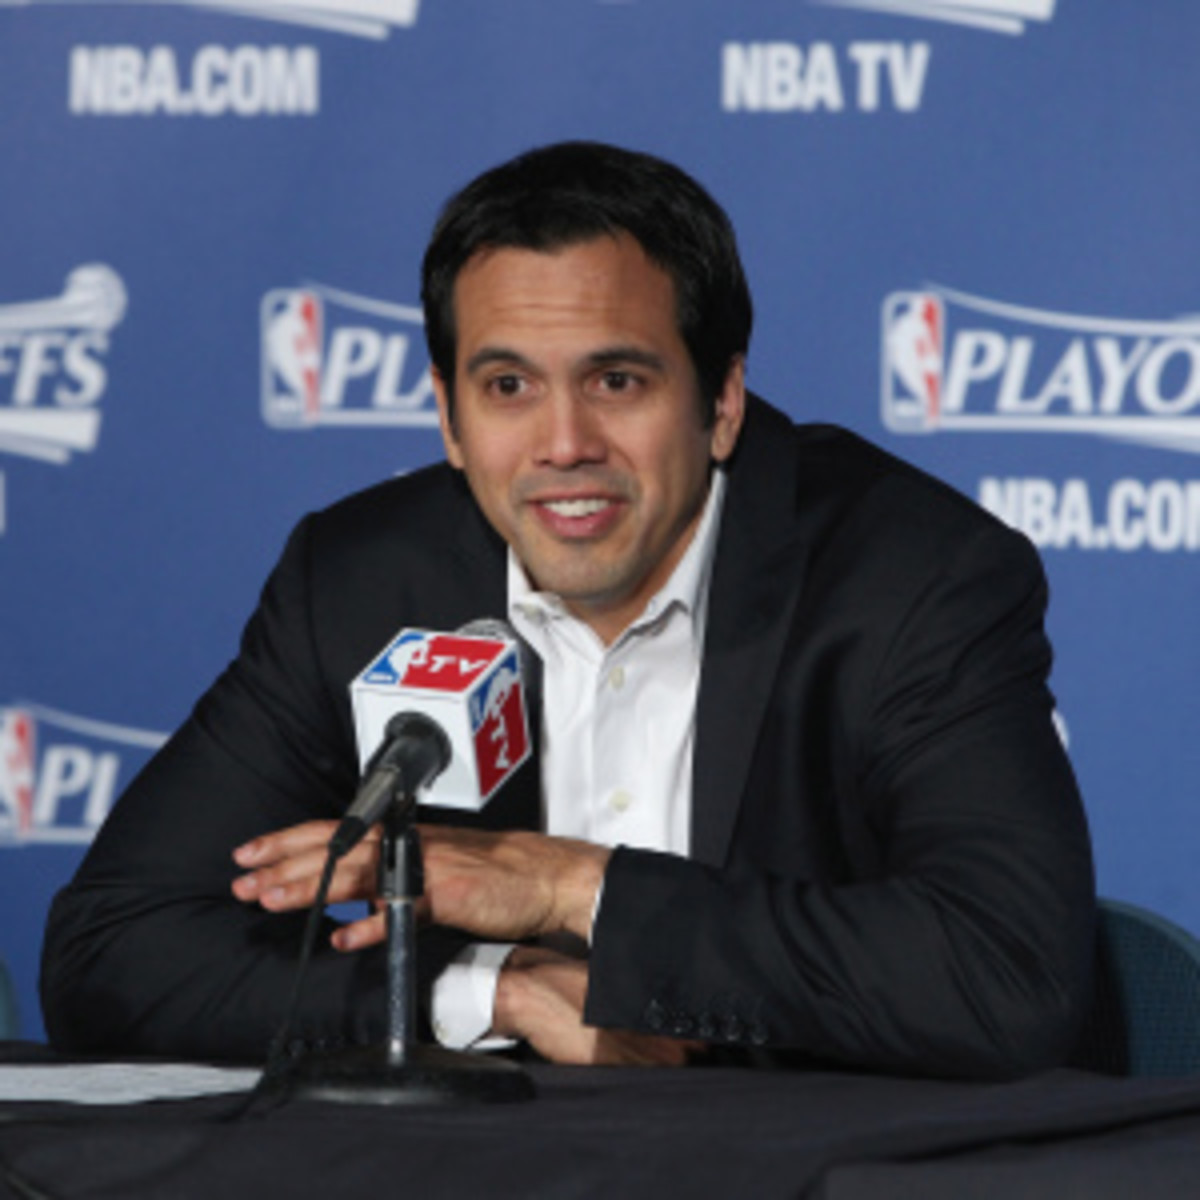 Erik Spoelstra said winning Coach of the Year is like the Sports Illustrated cover jinx. (Gary Dineen/Getty Images)